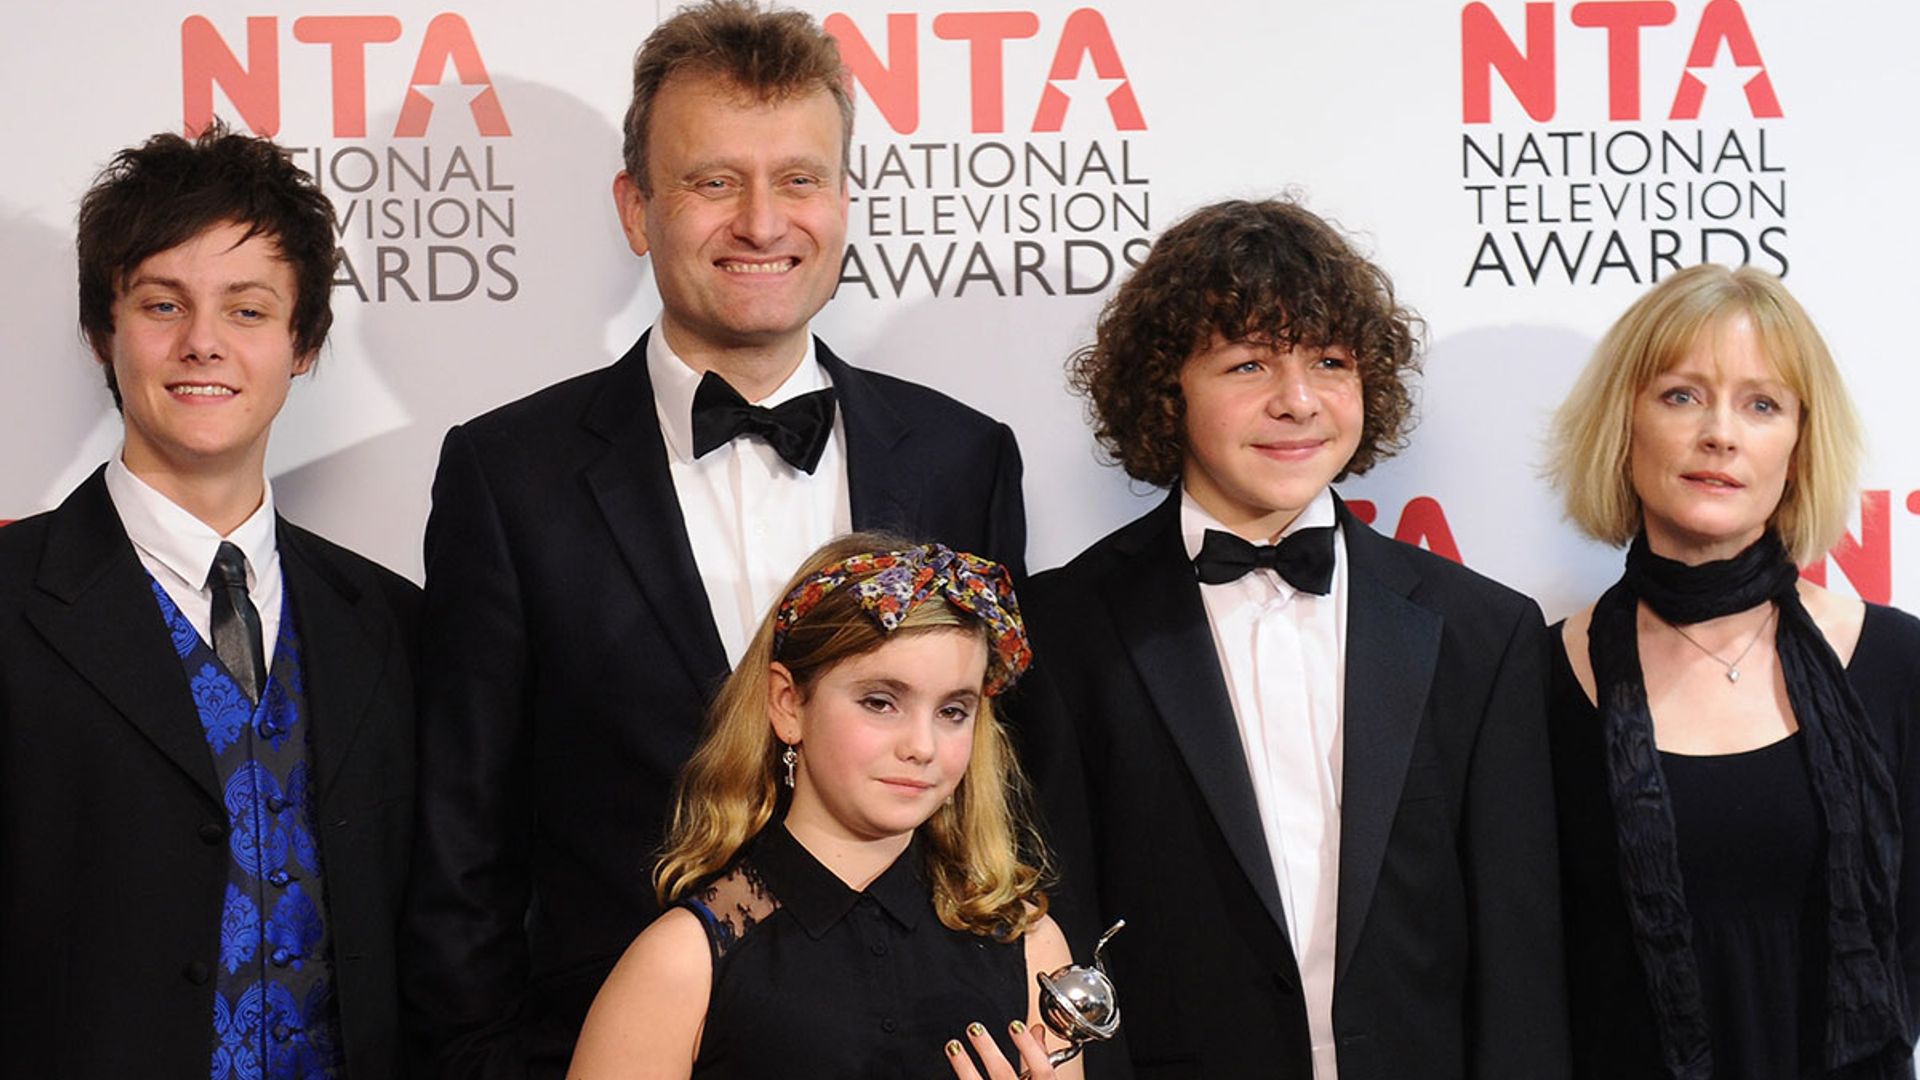 Hugh Dennis teases new Outnumbered series with on-screen wife Claire Skinner